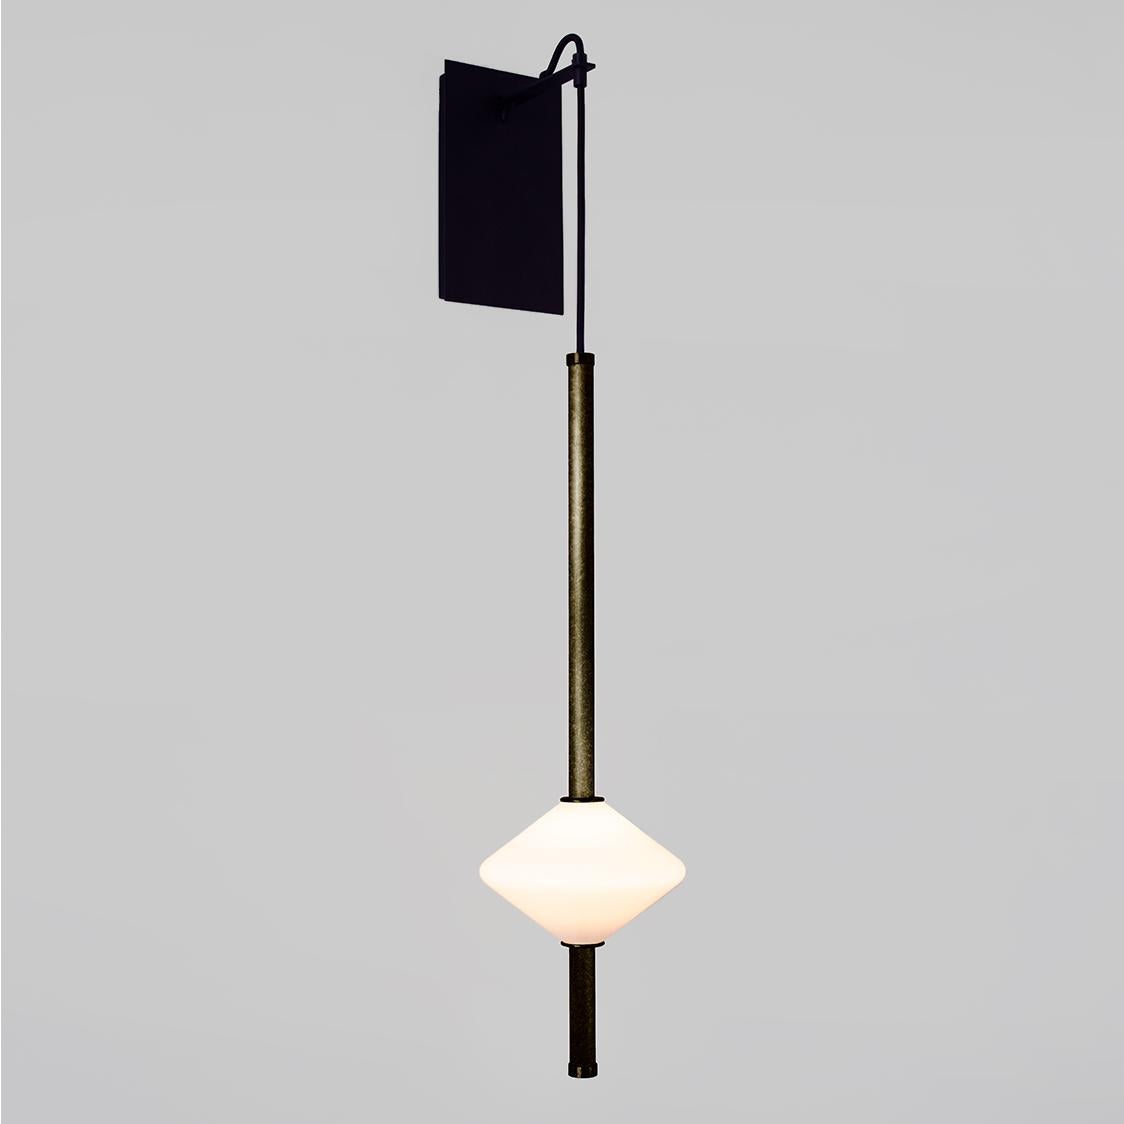 The GEM 1 Wall Sconce is built of brass with an LED light source that is diffused by a hand-blown opal white glass diffuser. Each wall sconce delicately projects a Gem diffuser with fittings made of brass tubing. The wall sconce features a